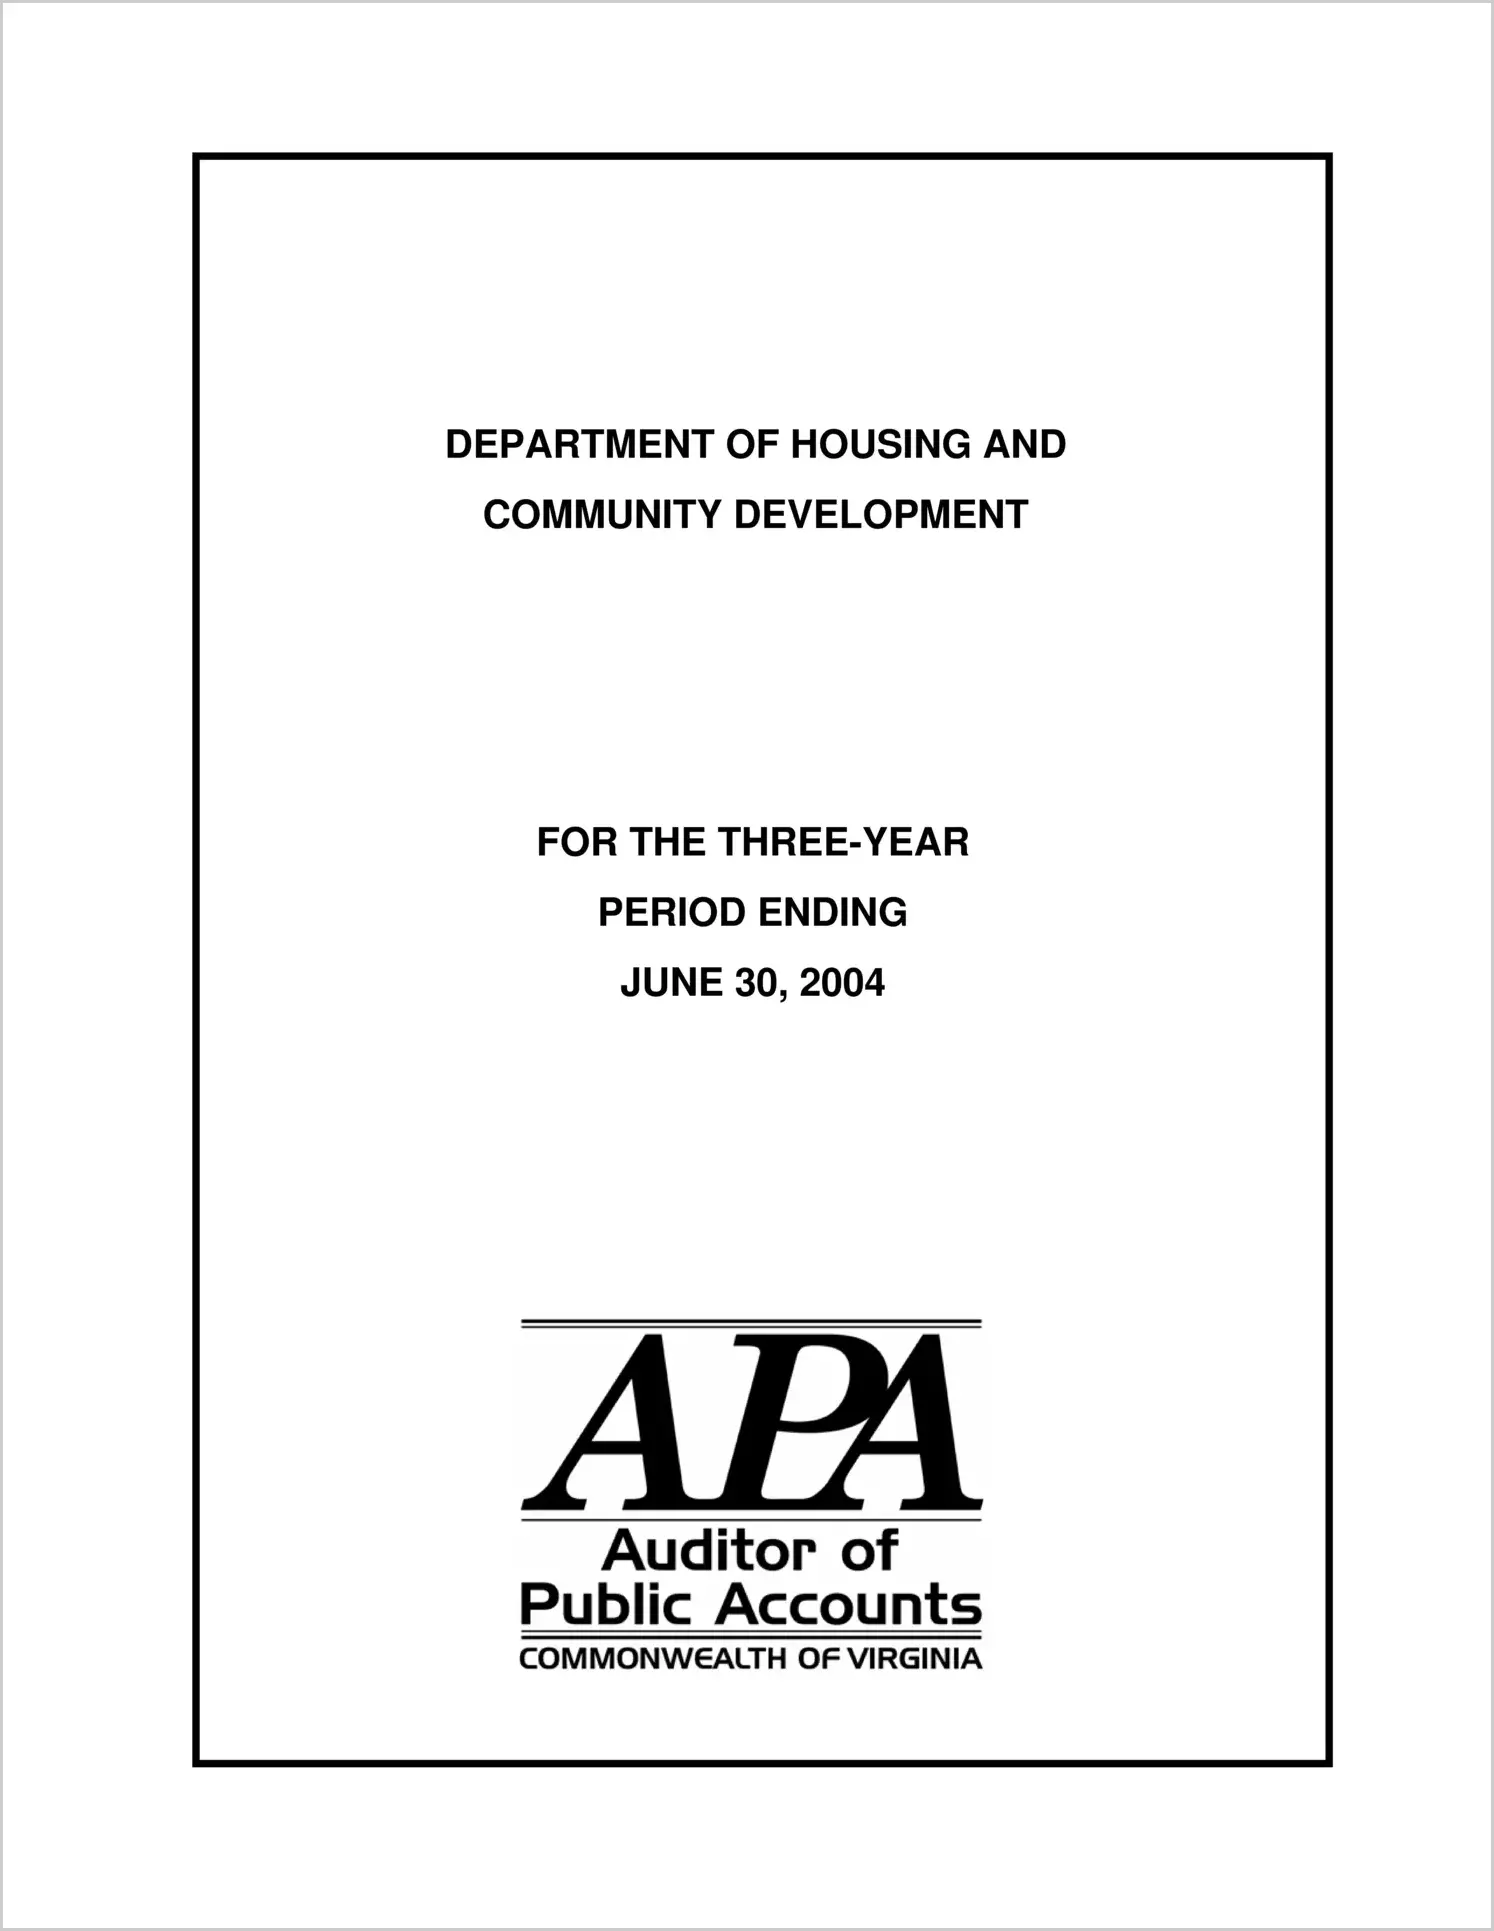 Department of Housing and Community Development for the three-year period ended June 30, 2004